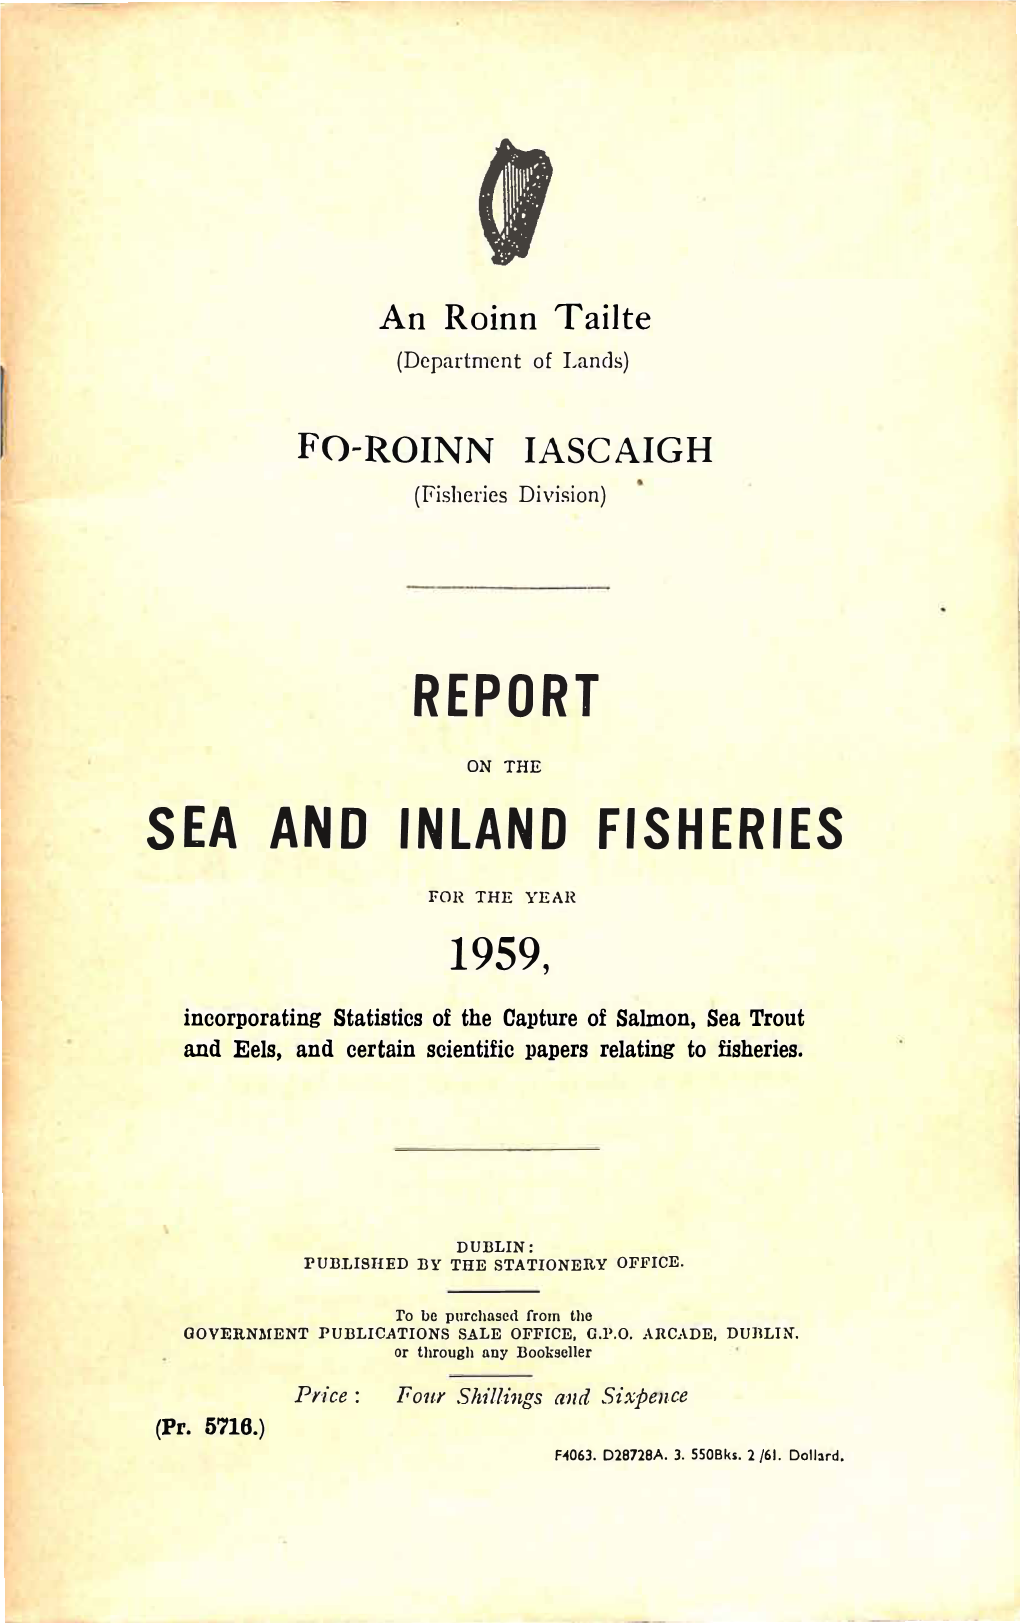 Report on the Sea and Inland Fisheries